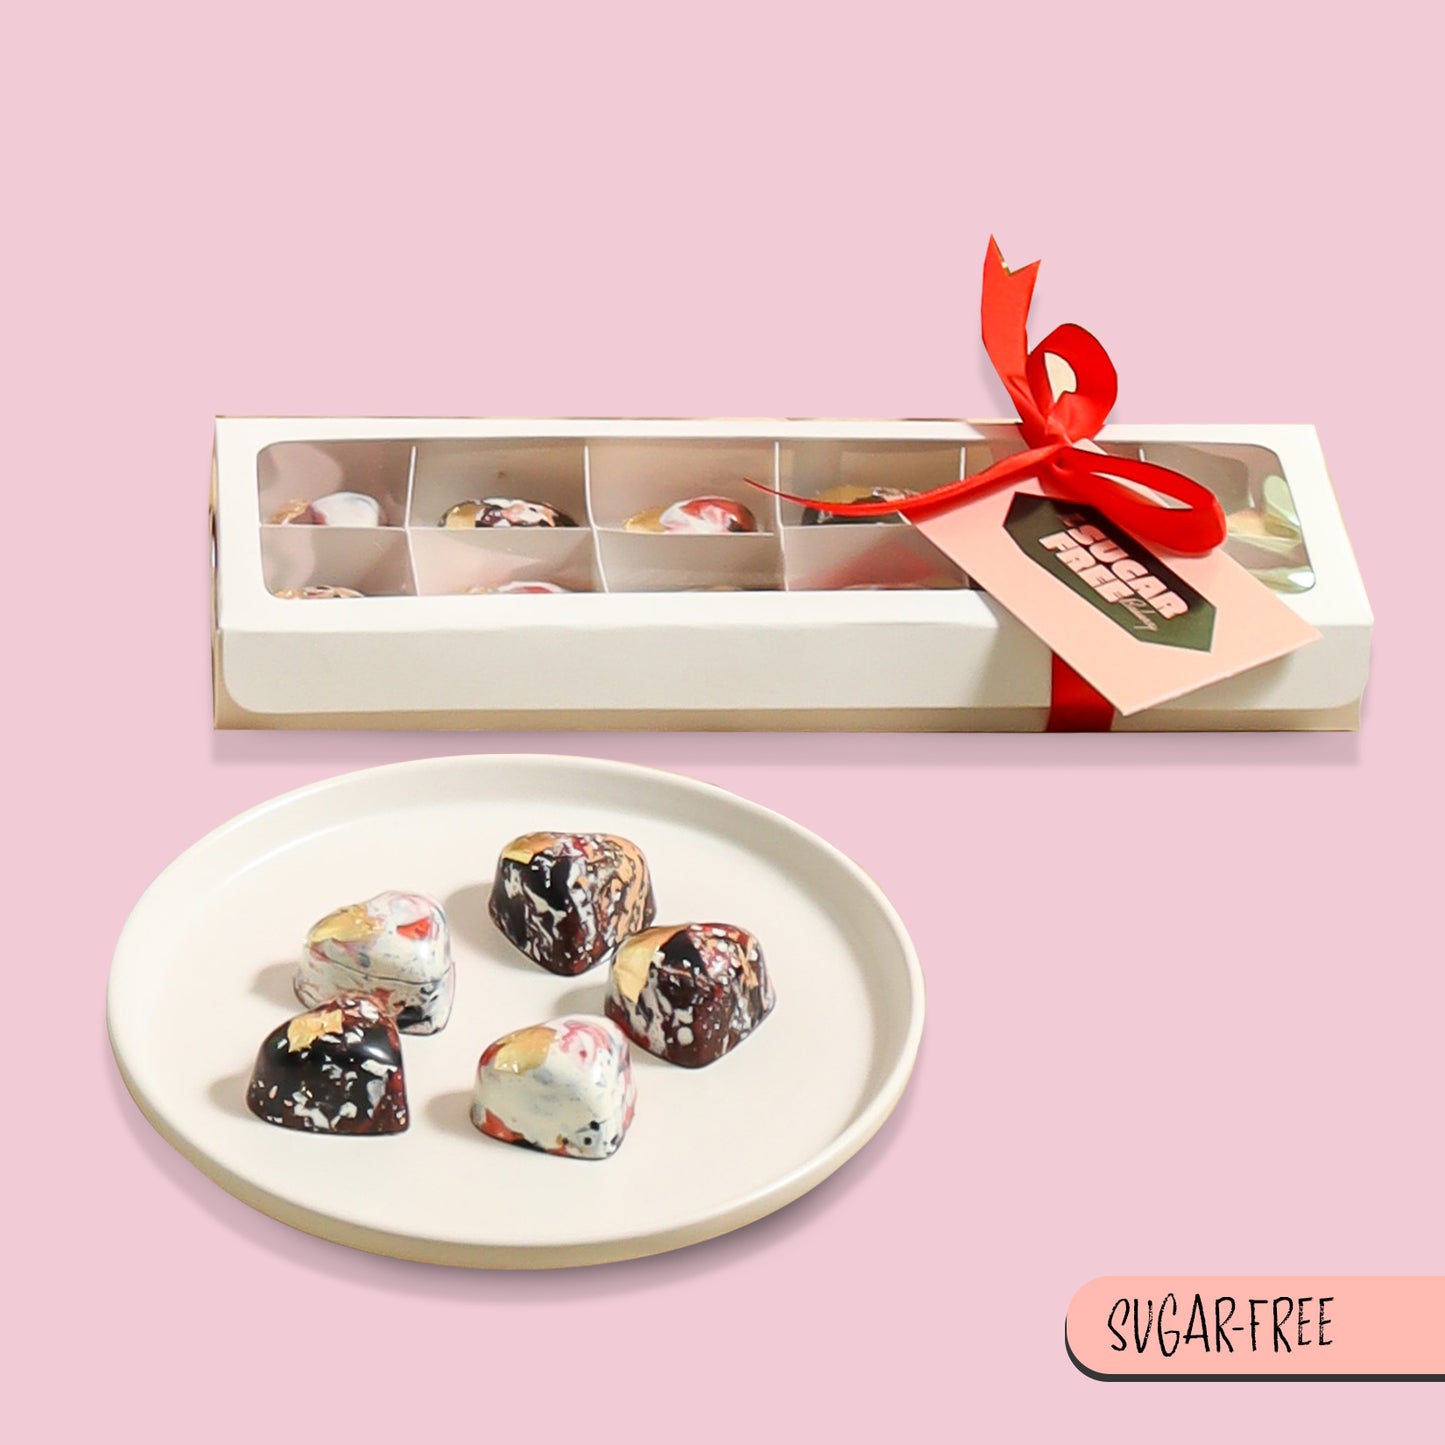 Fall in love with our Sugar-Free Chocolate Hearts Gift Box, a delightful assortment of guilt-free chocolates